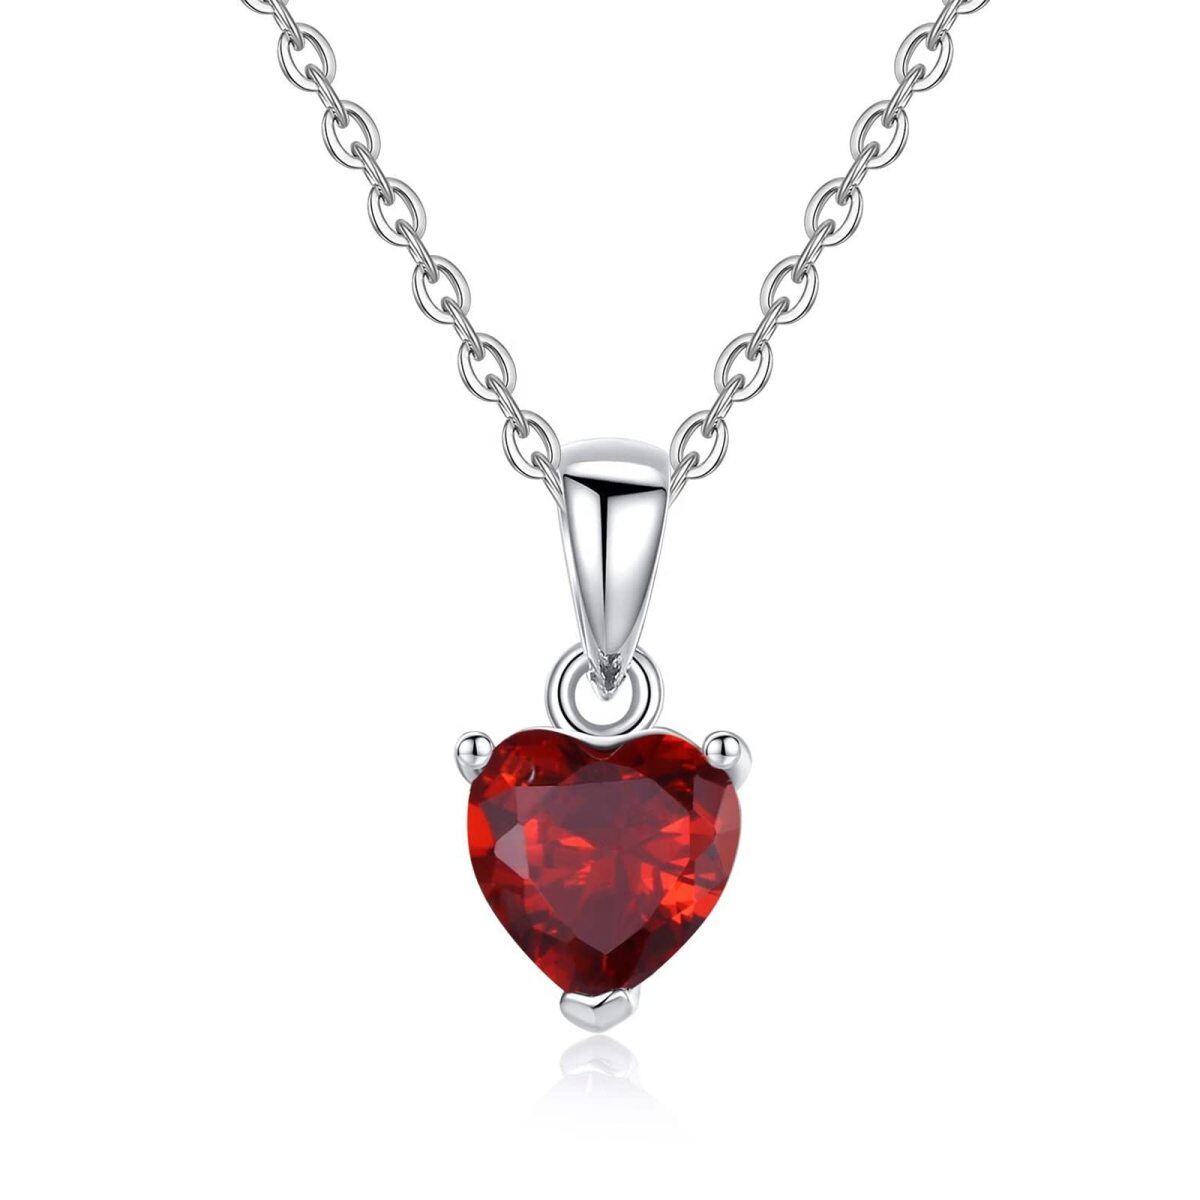 10K White Gold Heart Shaped Cubic Zirconia Personalized Birthstone Pendant Necklace-1